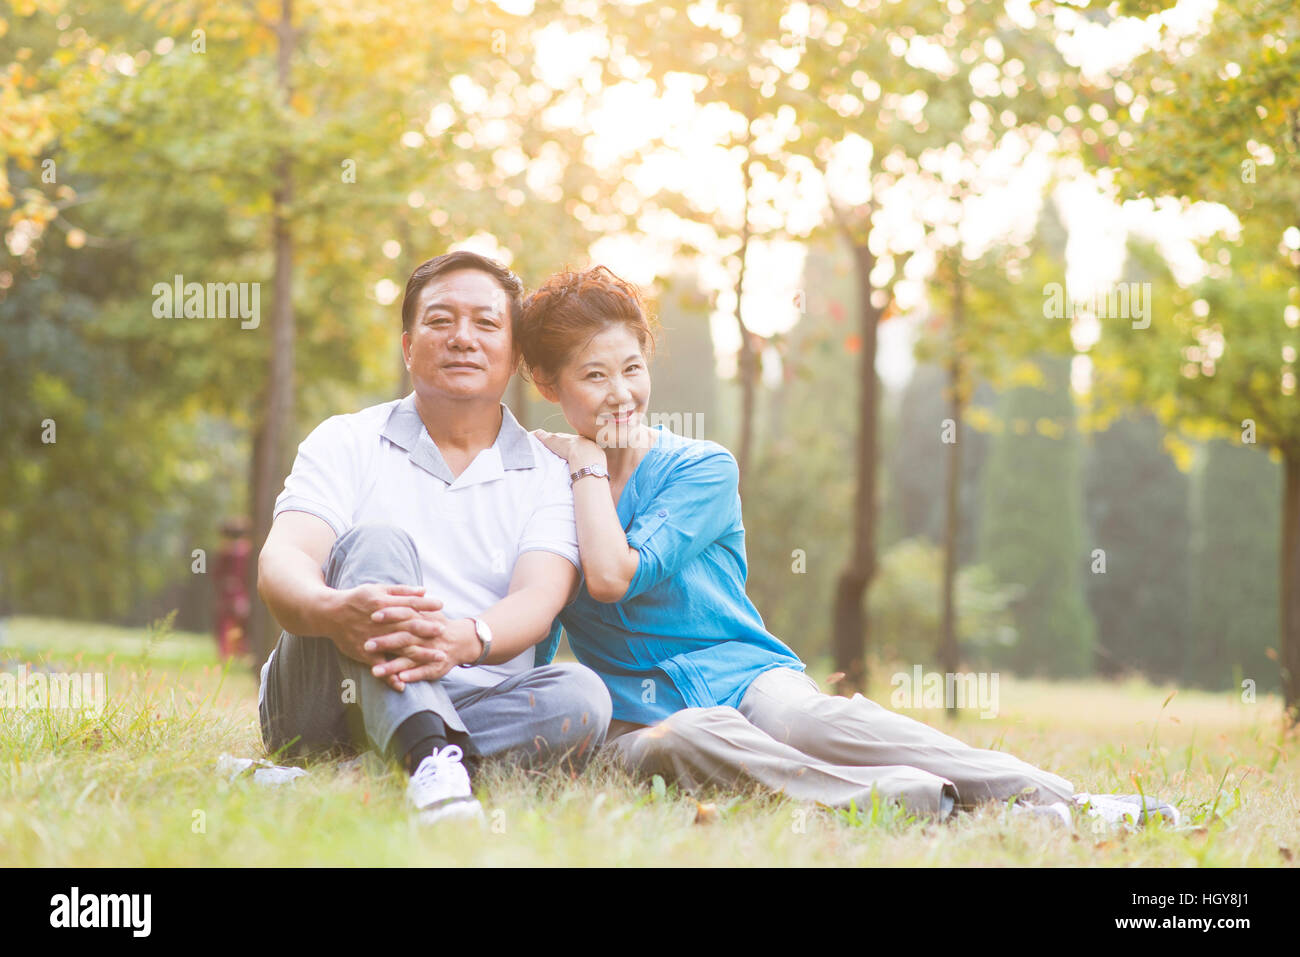 Love the elderly couple in the park early in the morning Stock Photo